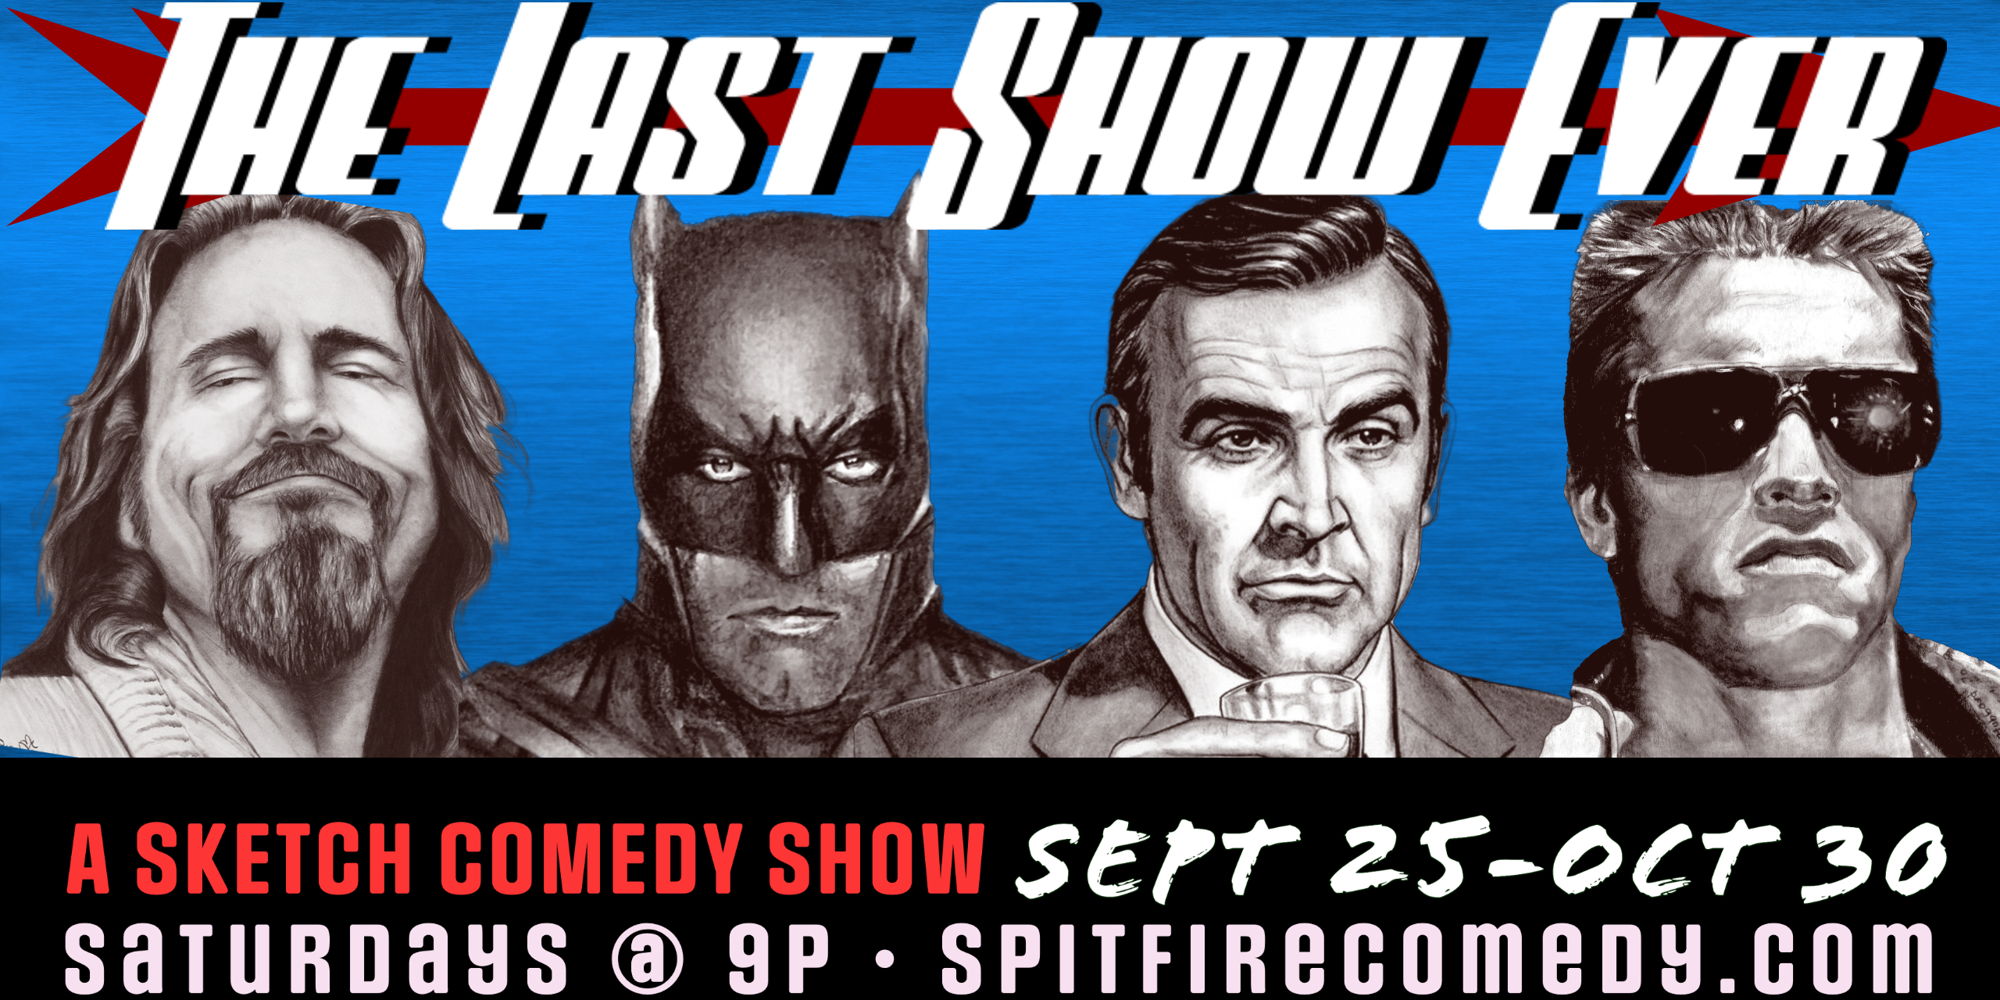 The Last Show Ever promotional image